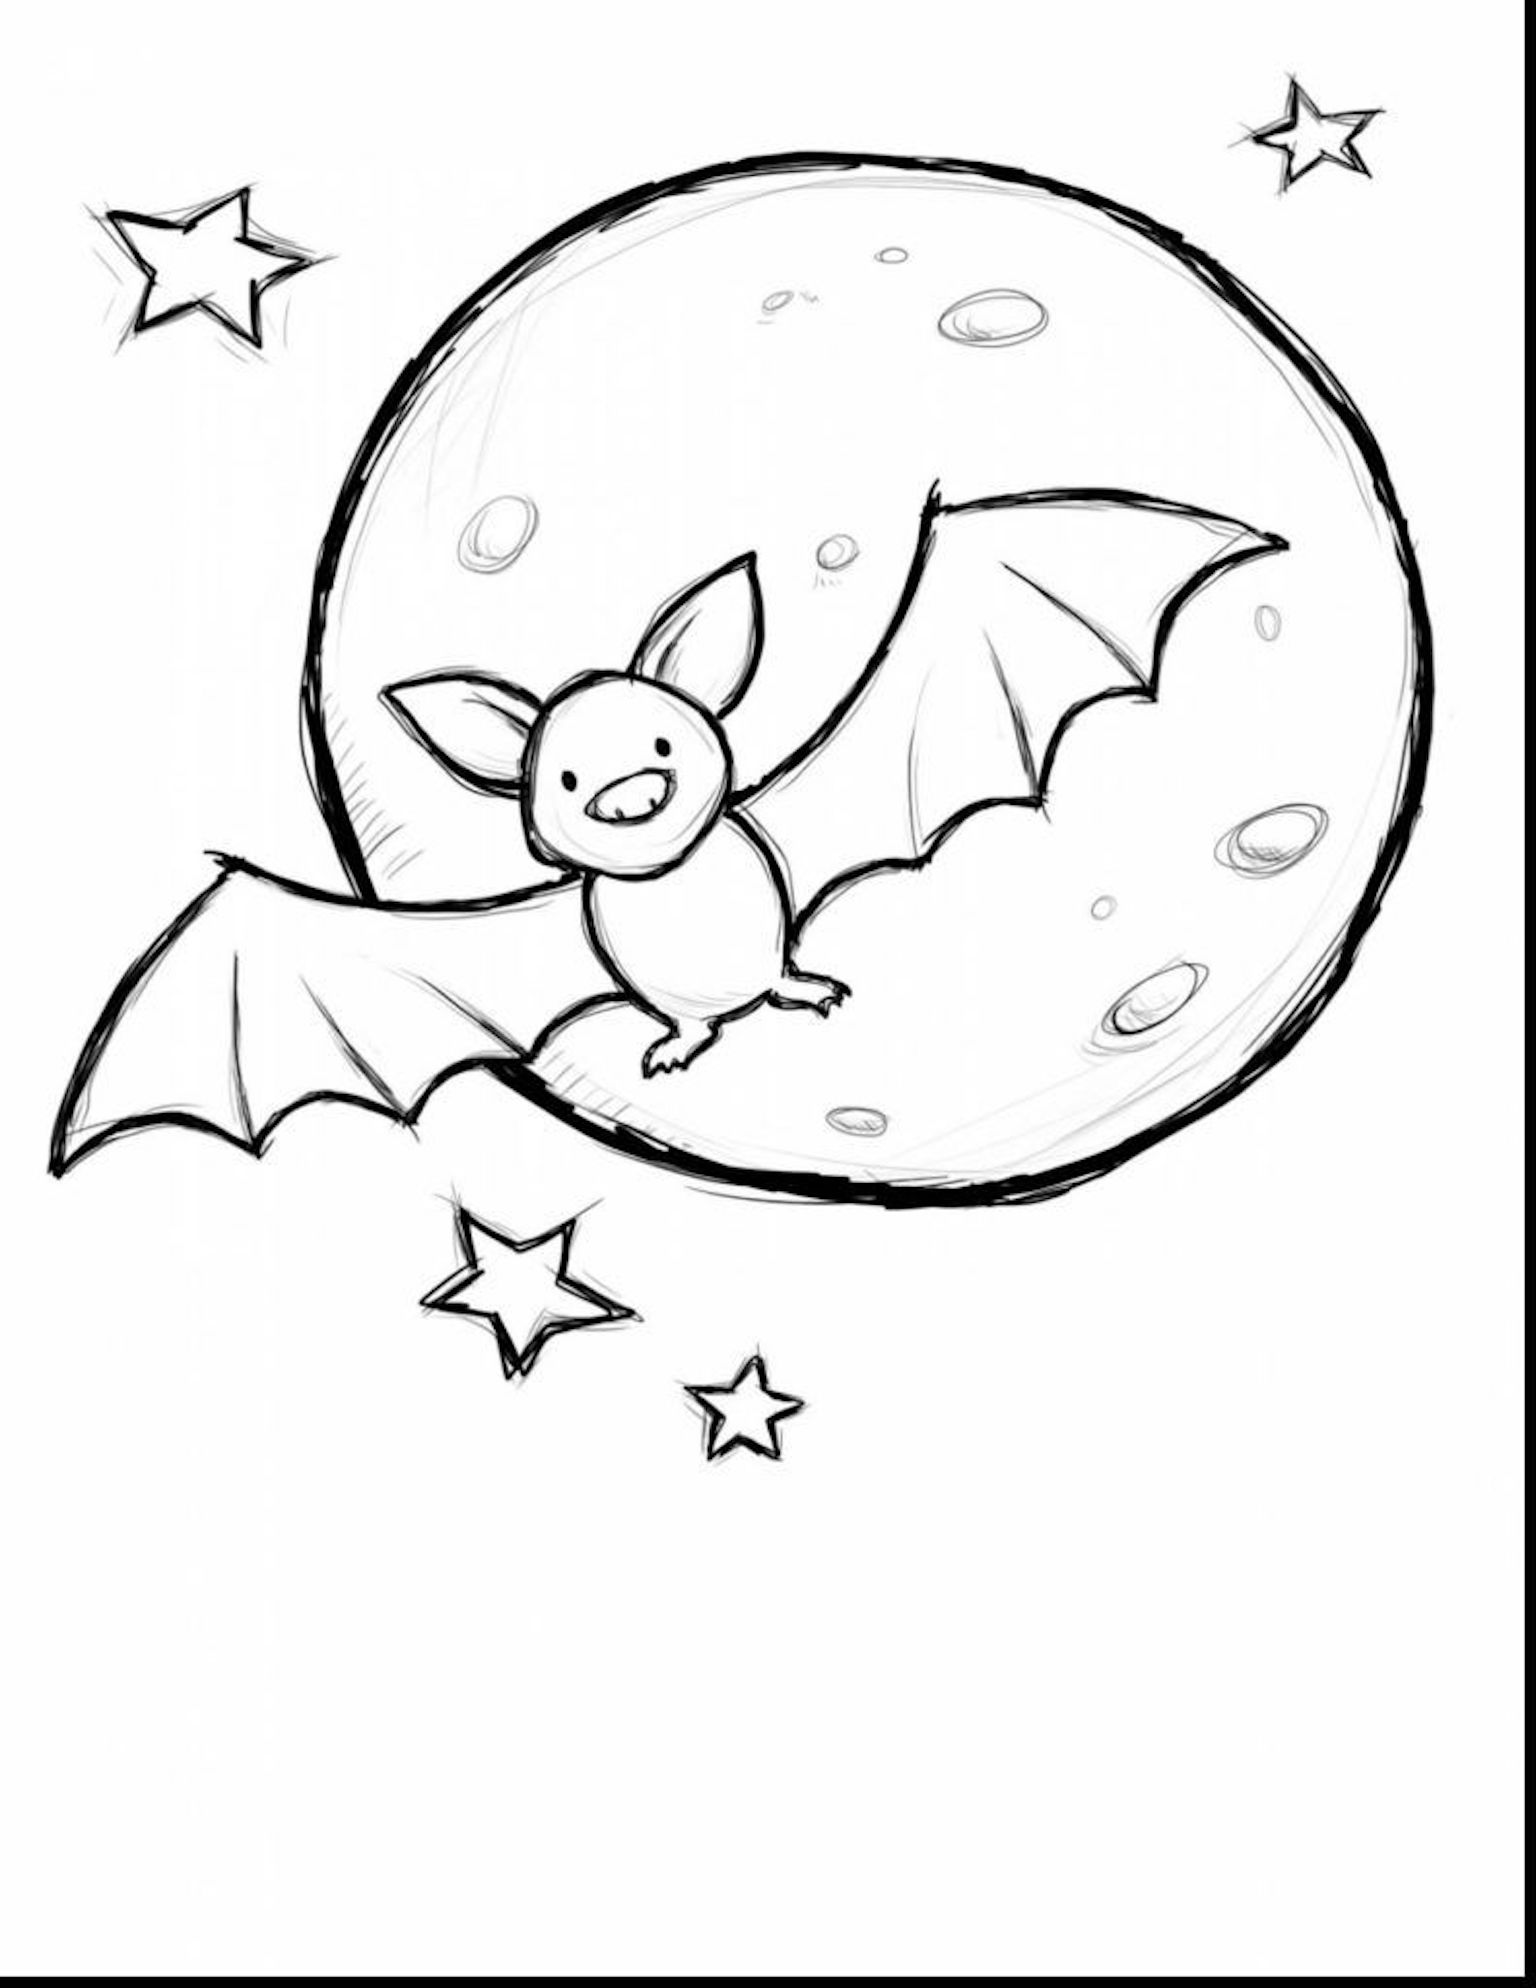 Bat Coloring Pages And Dozens More Top 10 Themed Coloring Challenges